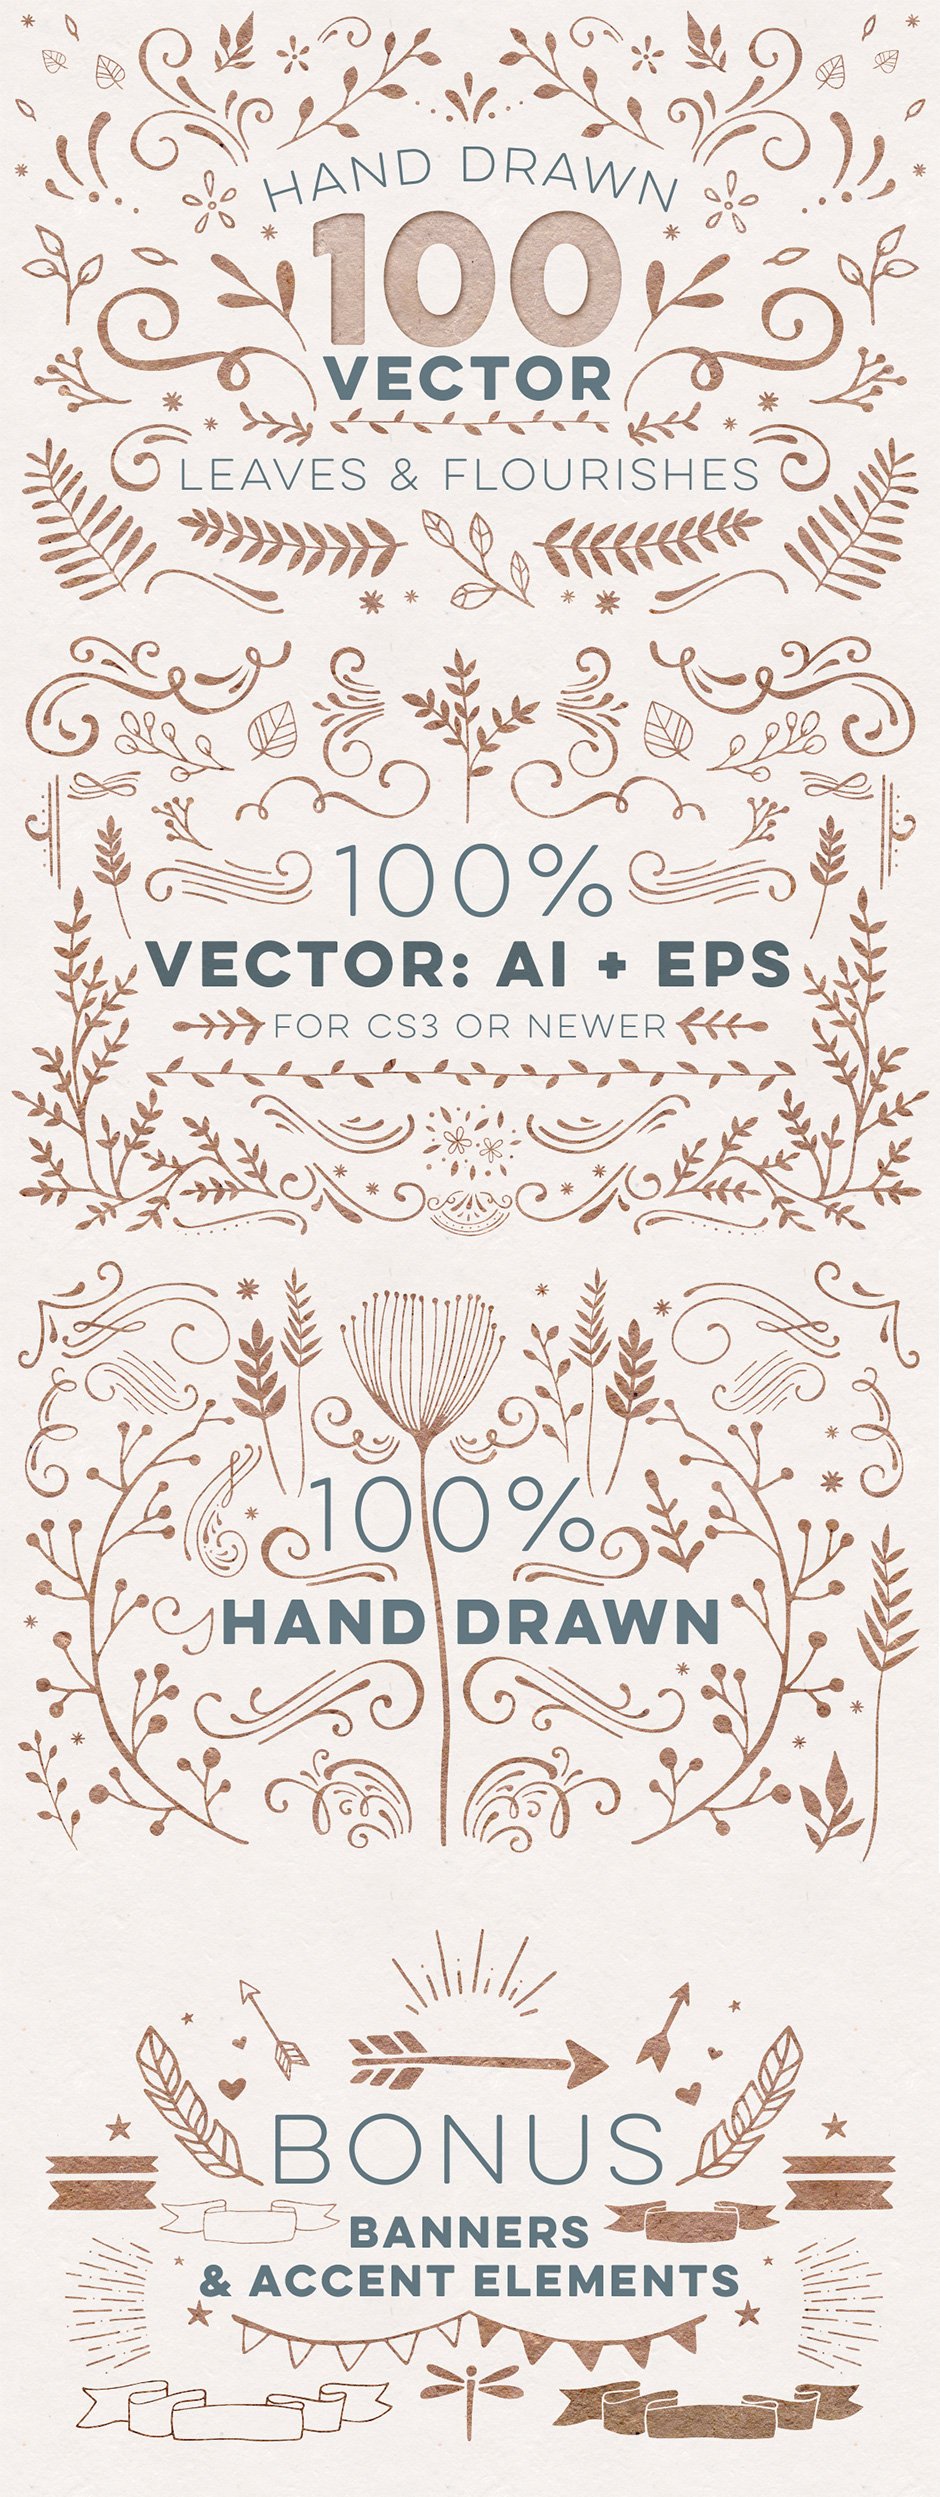 The Complete Vector Design Toolkit